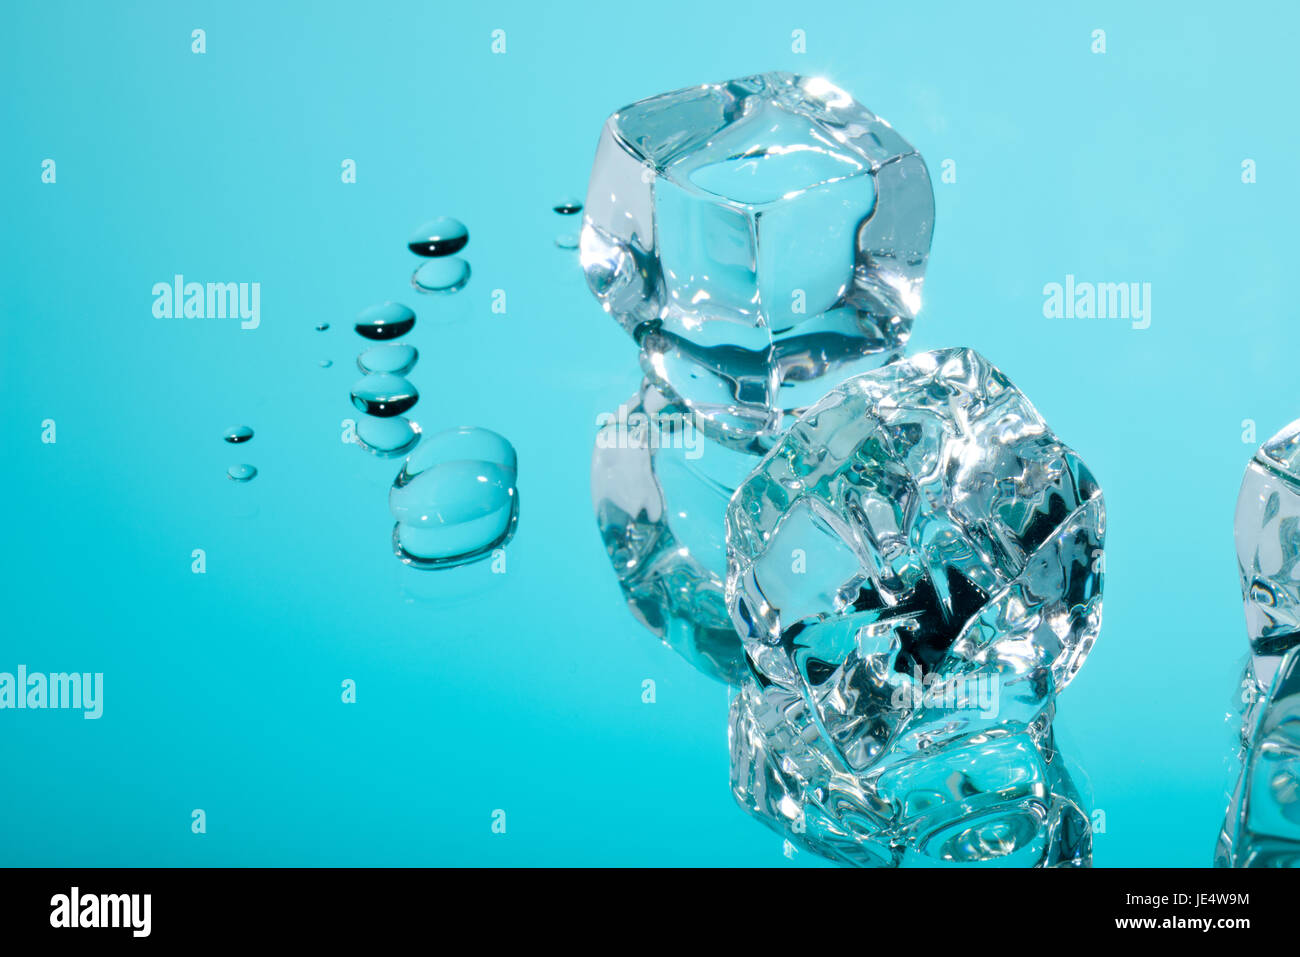 Acrylic ice cubes and drops of water. Stock Photo